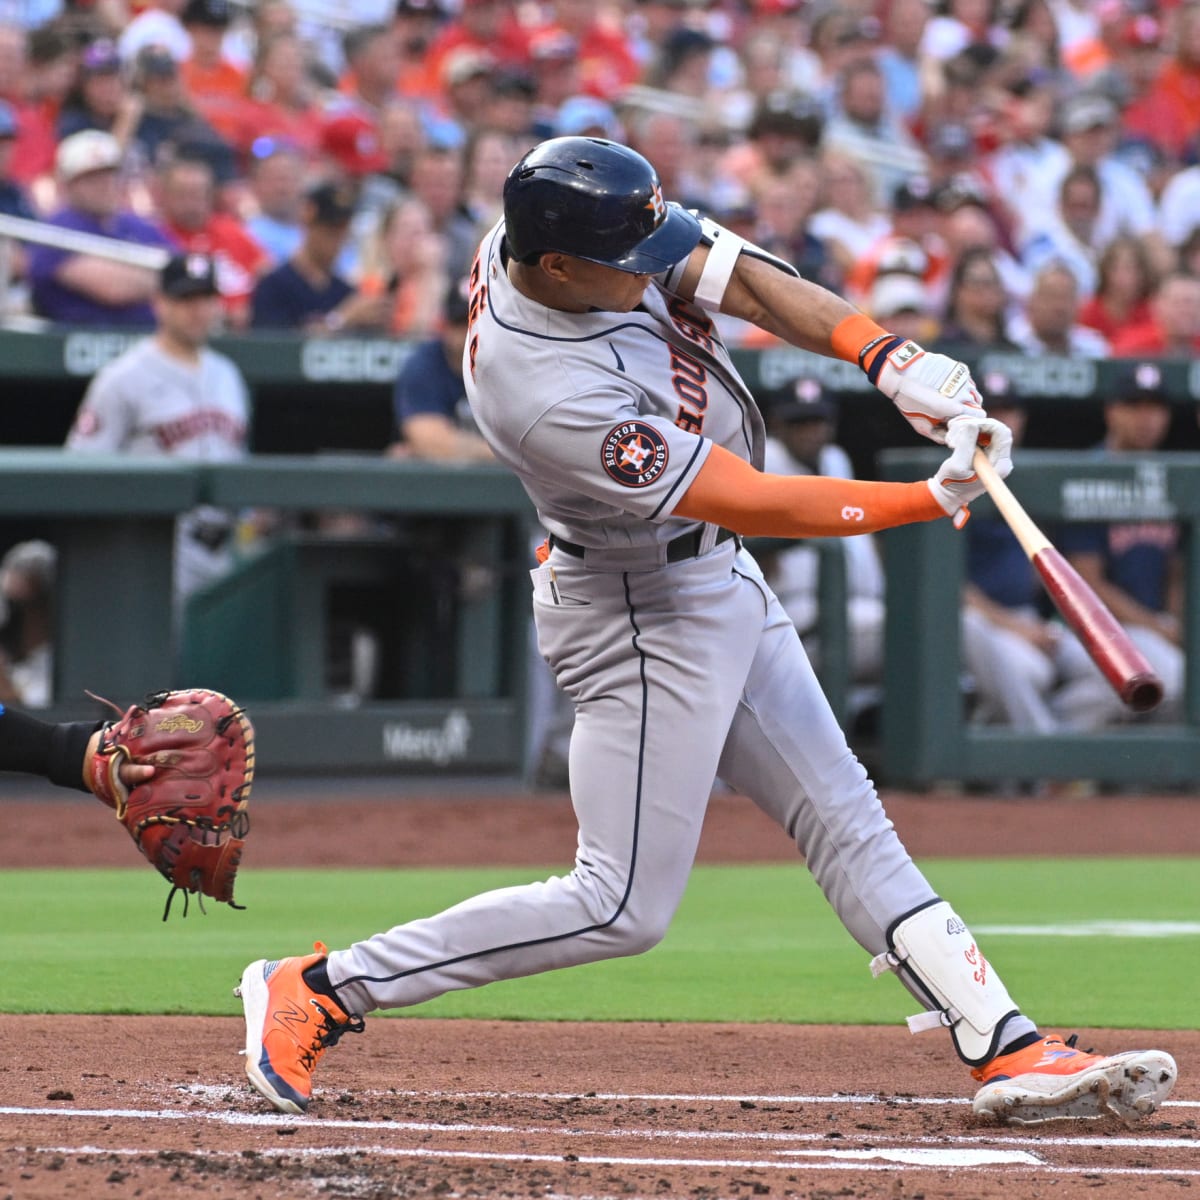 Rookie Jeremy Peña emerges as Astros' heartbeat in MLB playoffs